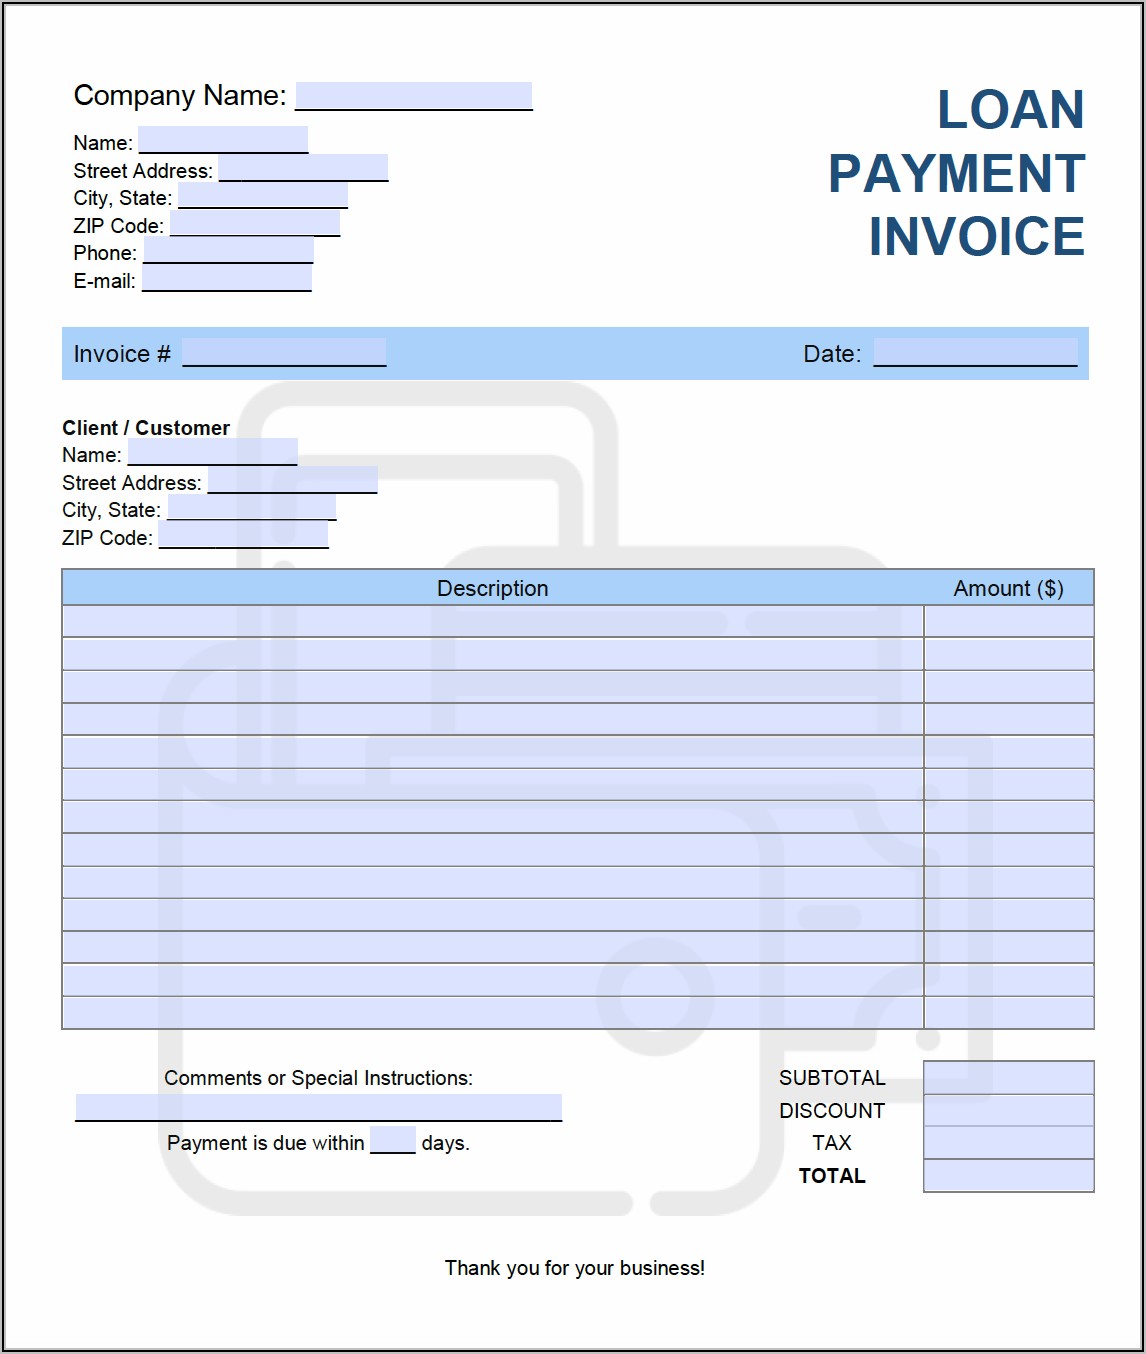 Loan Payment Invoice Template Free